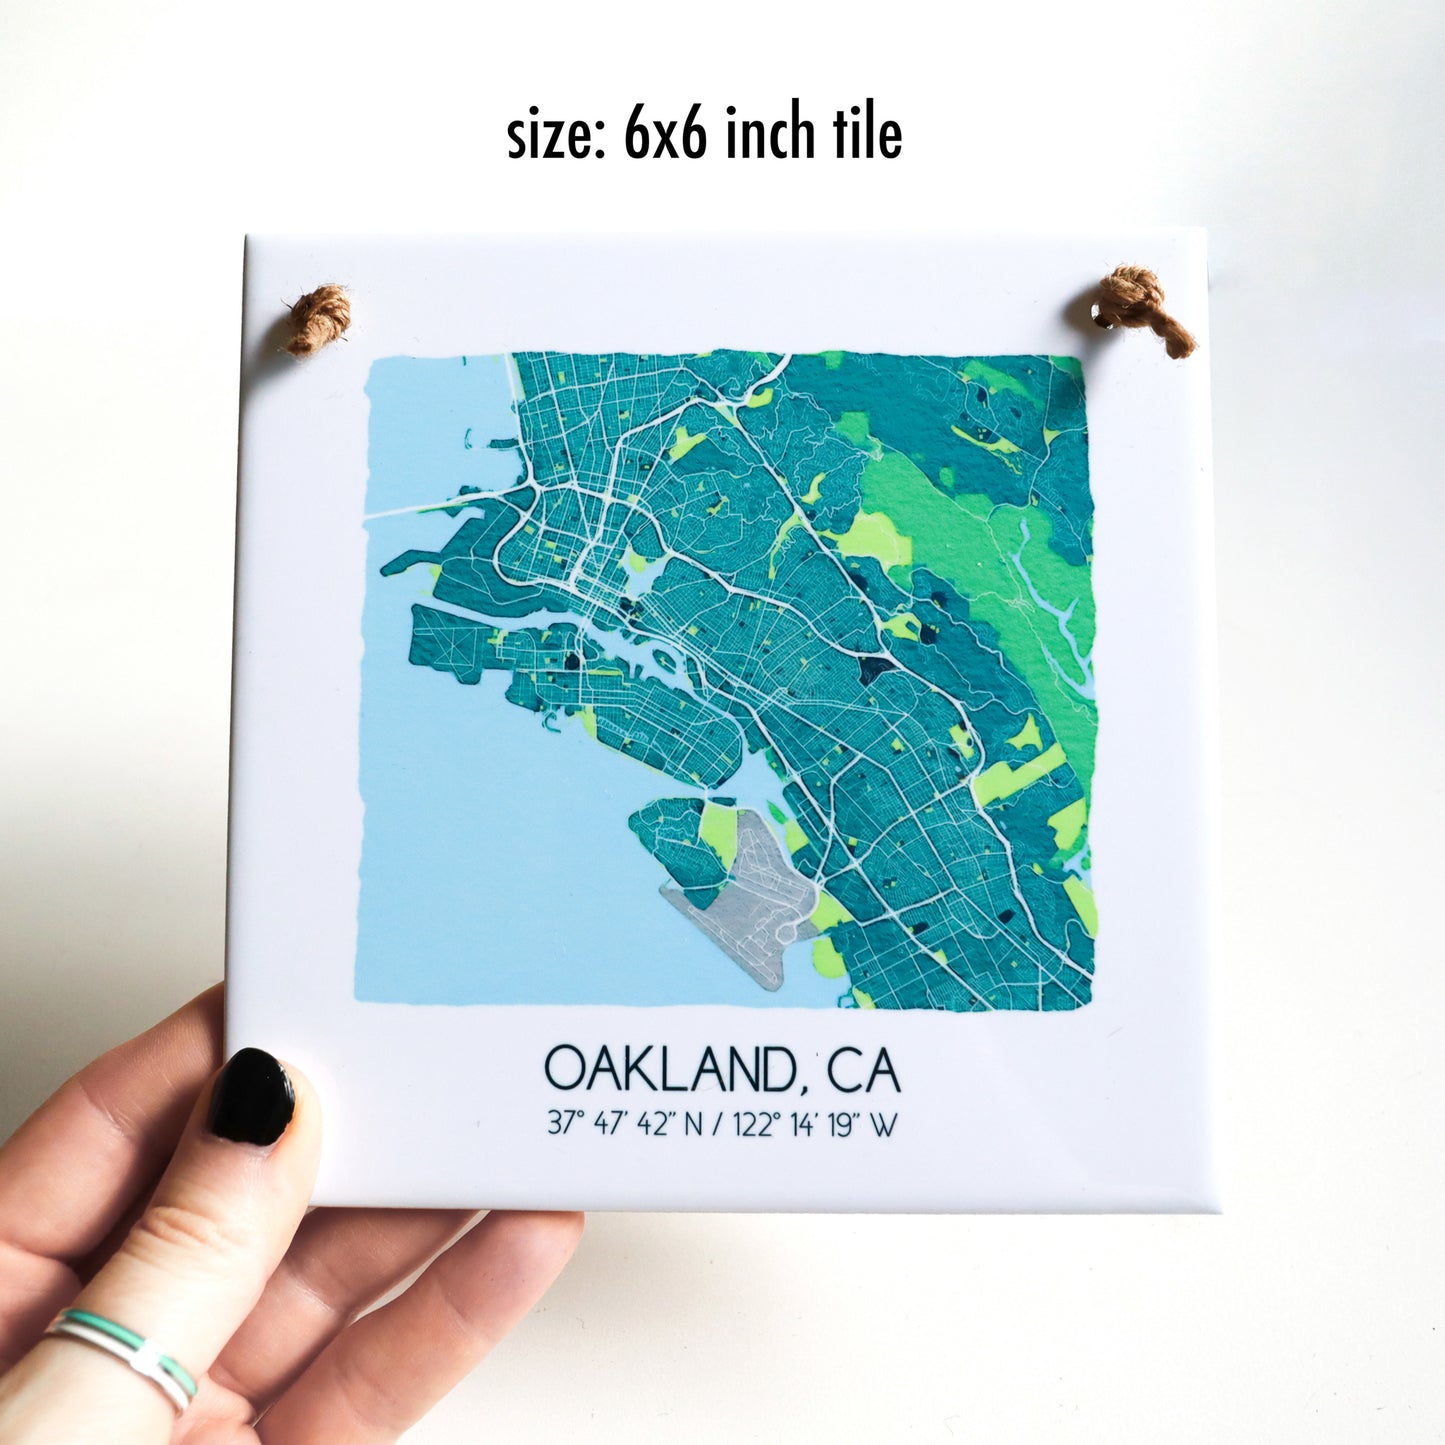 A hand holding a custom city map of a ceramic square tile sign, showing the 6x6 inch size